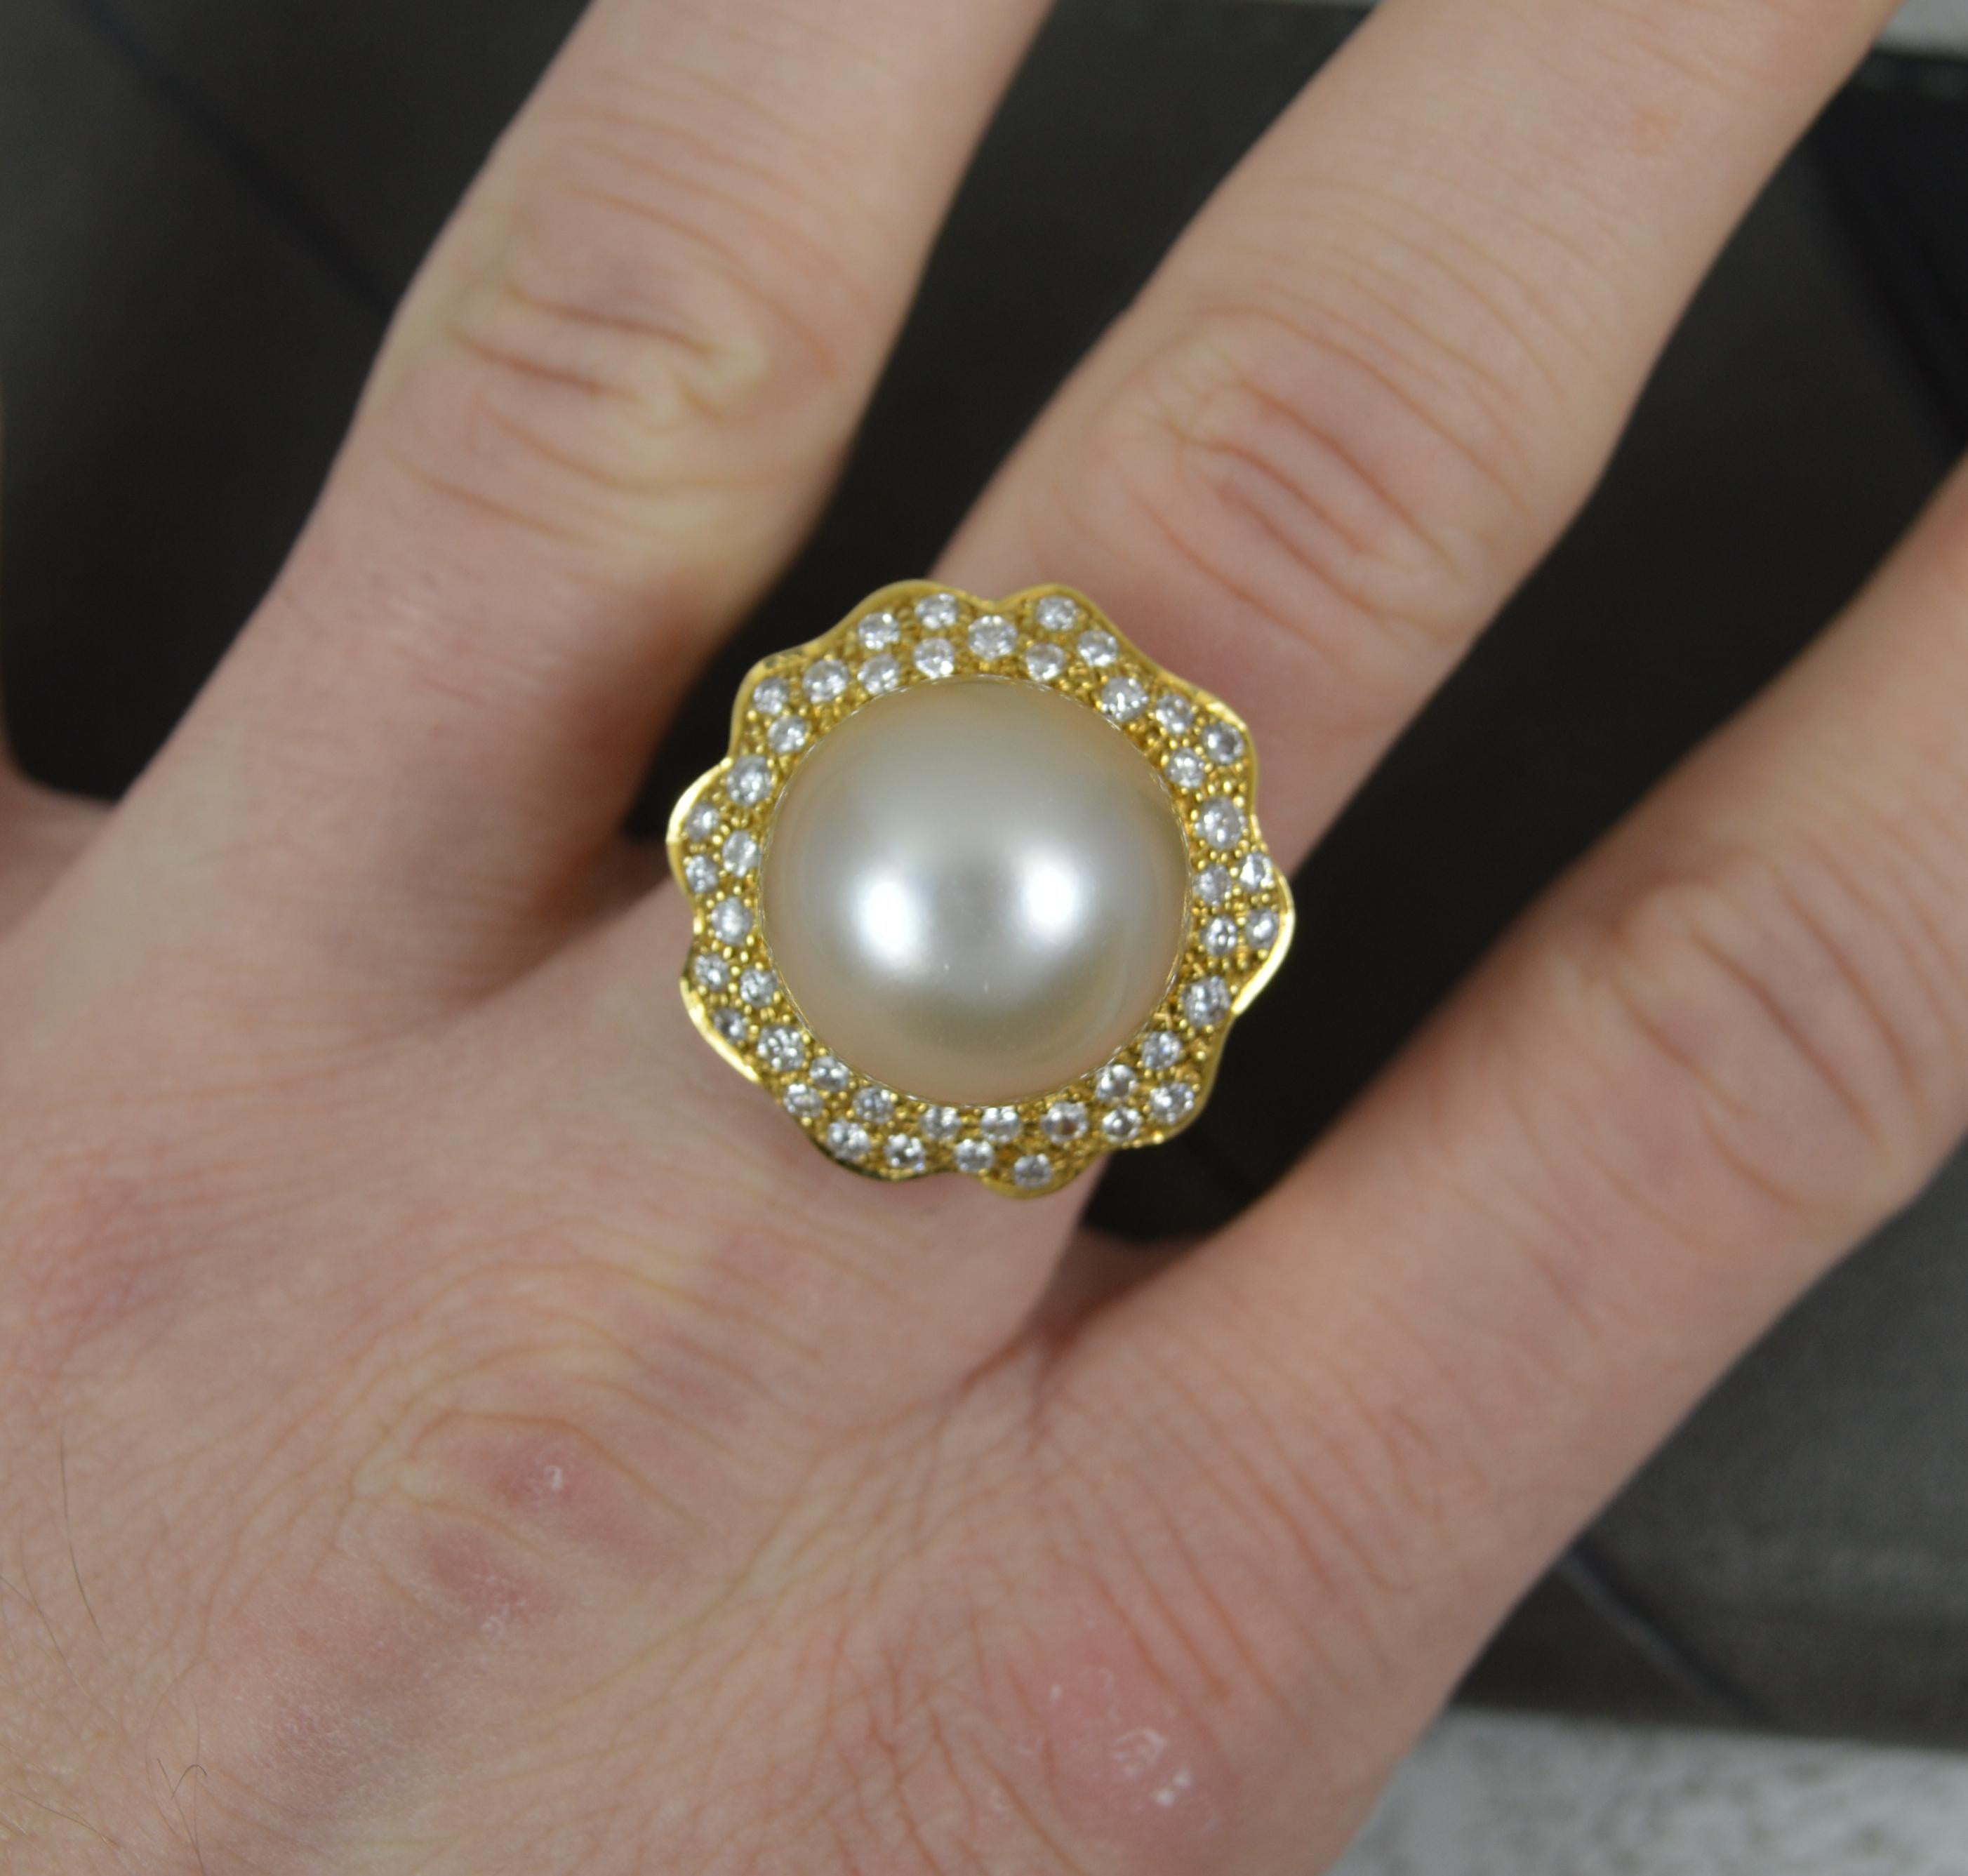 A stunning pearl and diamond ring by the renowned maker Andrew Grima.
Solid 18 carat yellow gold example. Heavy and solid.
Designed with a large pearl to centre, 14mm diameter. Surrounding are many round brilliant cut natural diamonds forming a